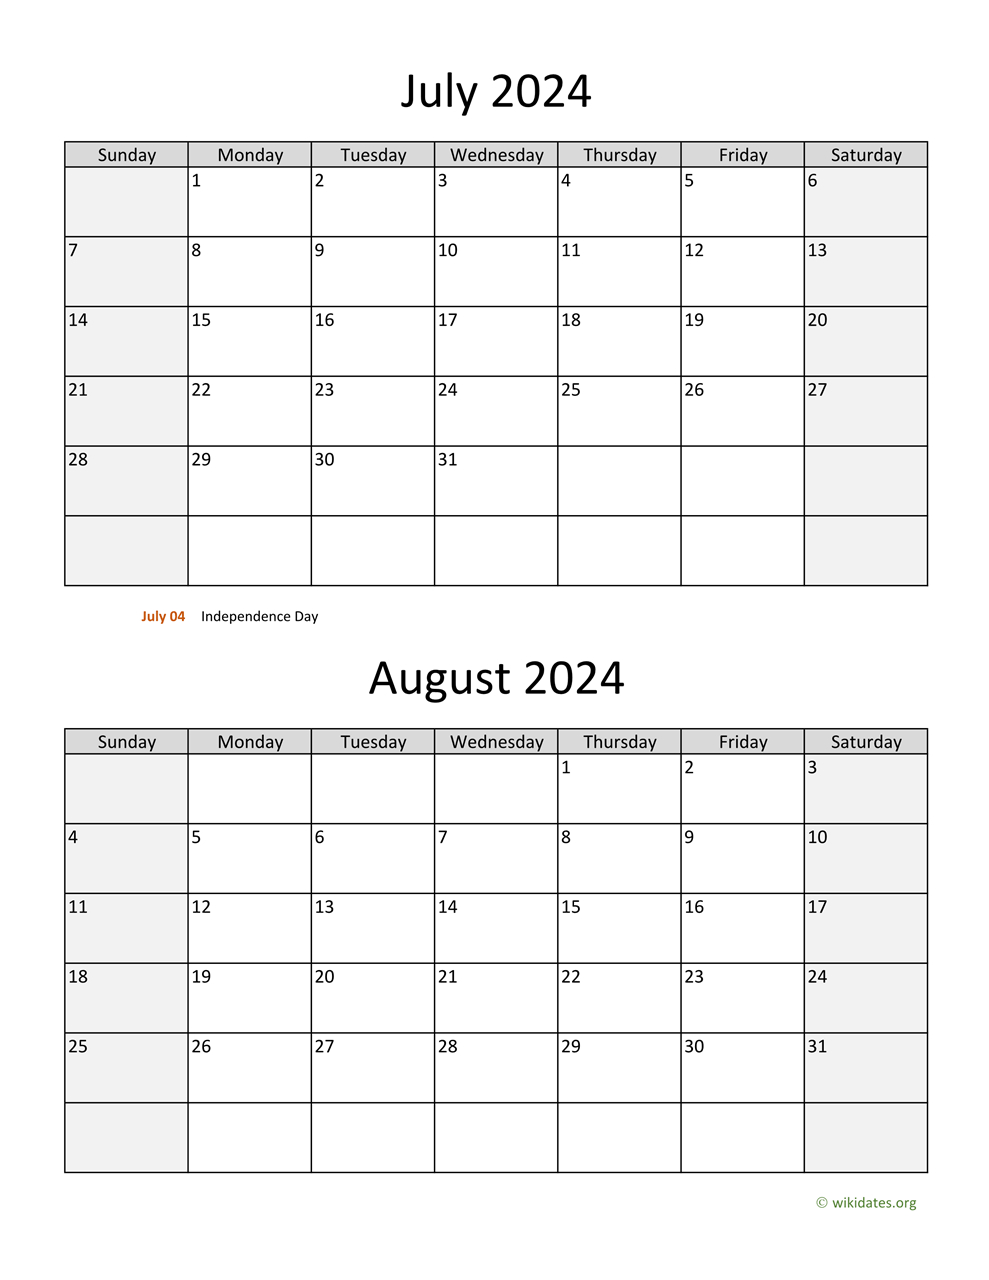 July And August 2024 Calendar | Wikidates | Printable Calendar 2024 July And August